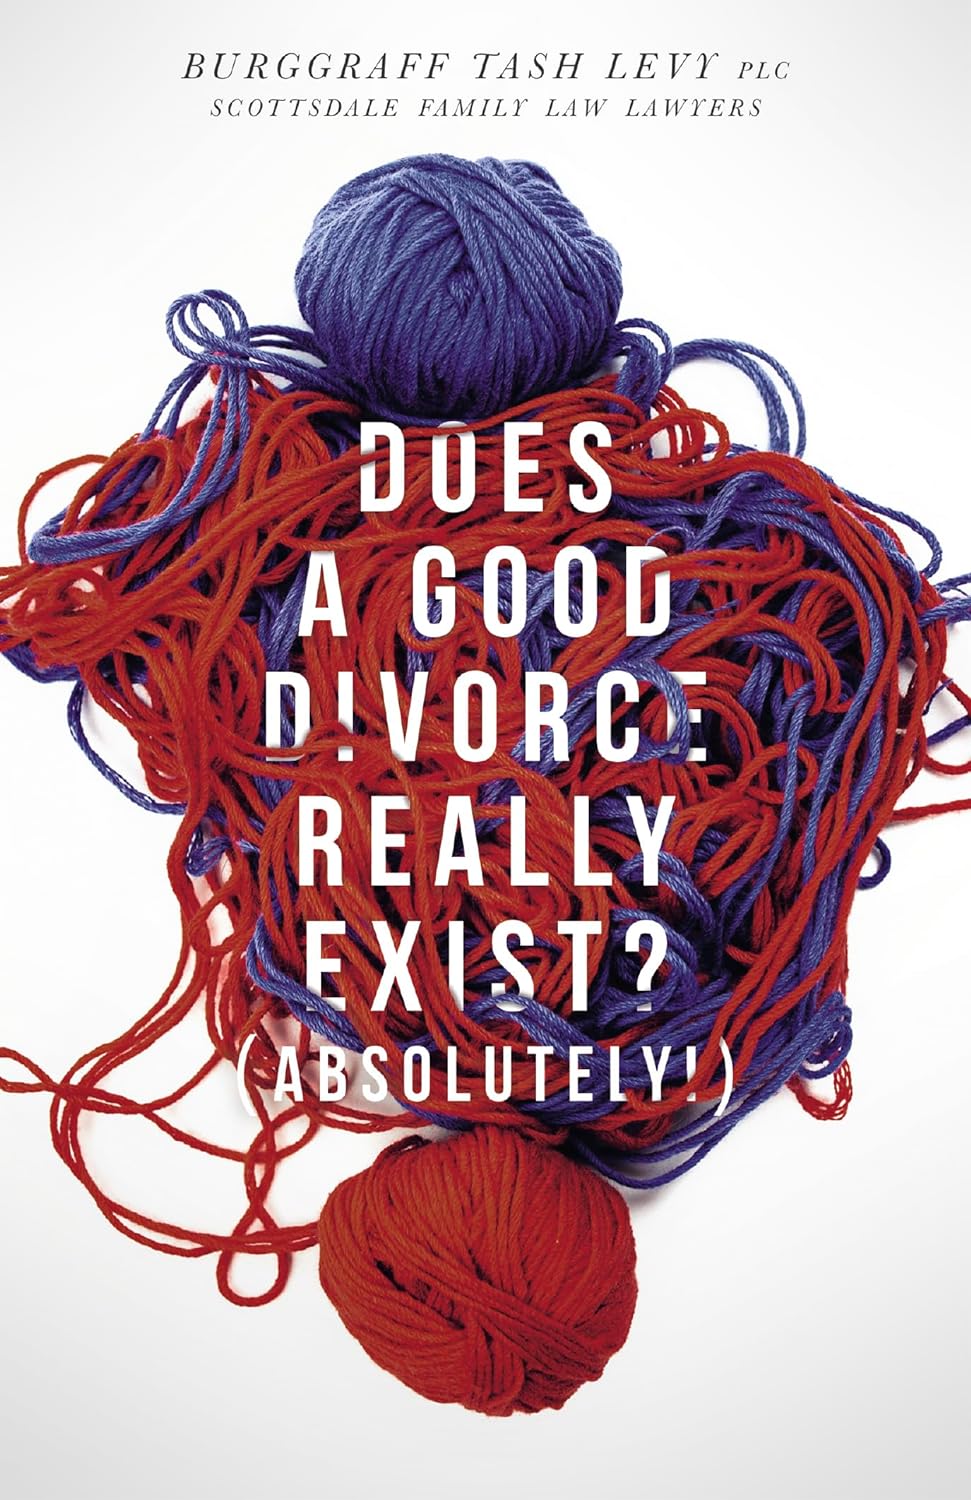 New book "Does a Good Divorce Really Exist? (Absolutely!)" by Randi Burggraff, Justin Tash, and Bryan Levy is released, a guide to ending a marriage with dignity and finding amicable resolution